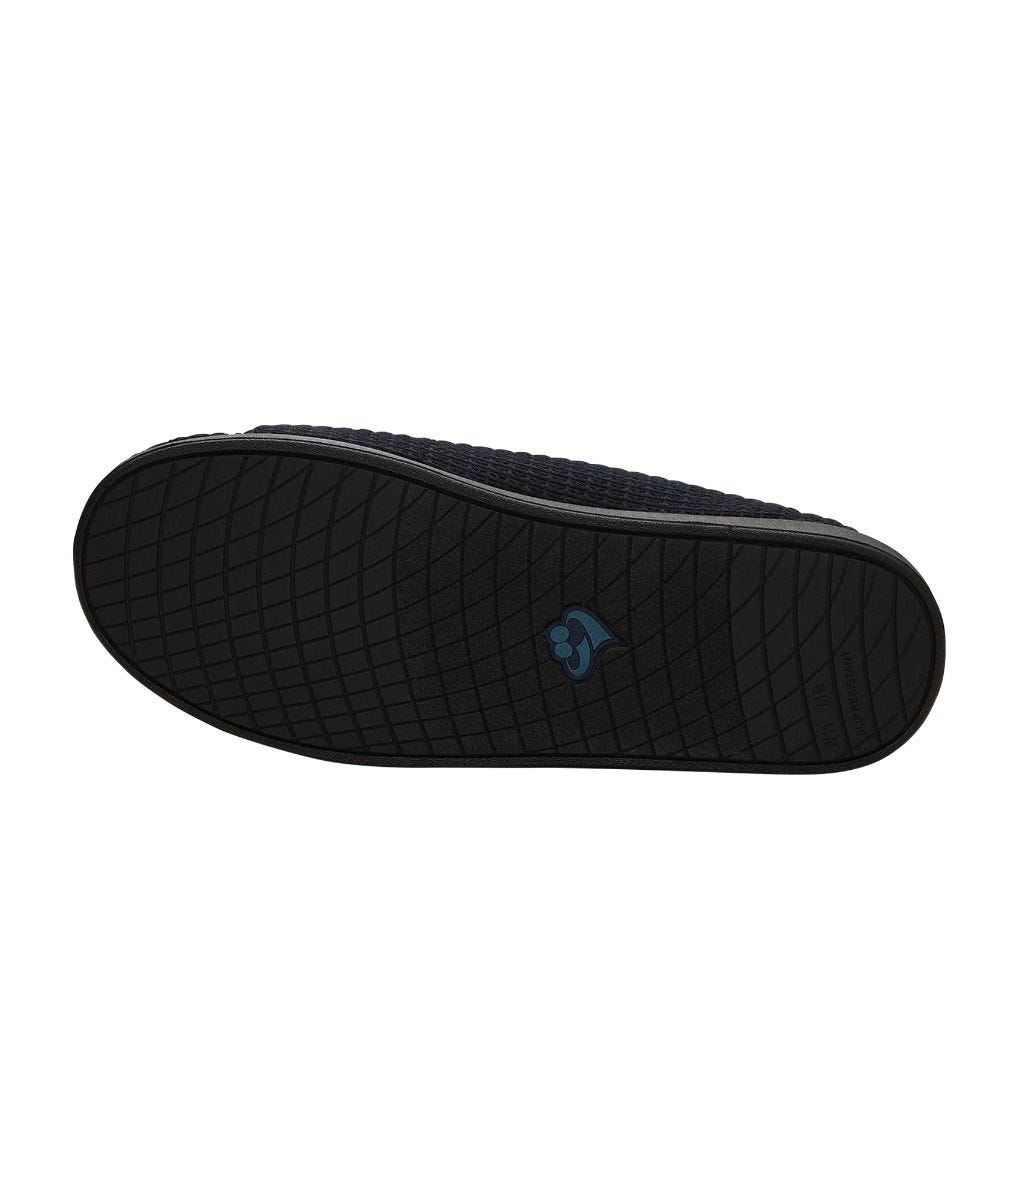 Bottom of wide black indoor slippers with black soles and removable memory foam insoles